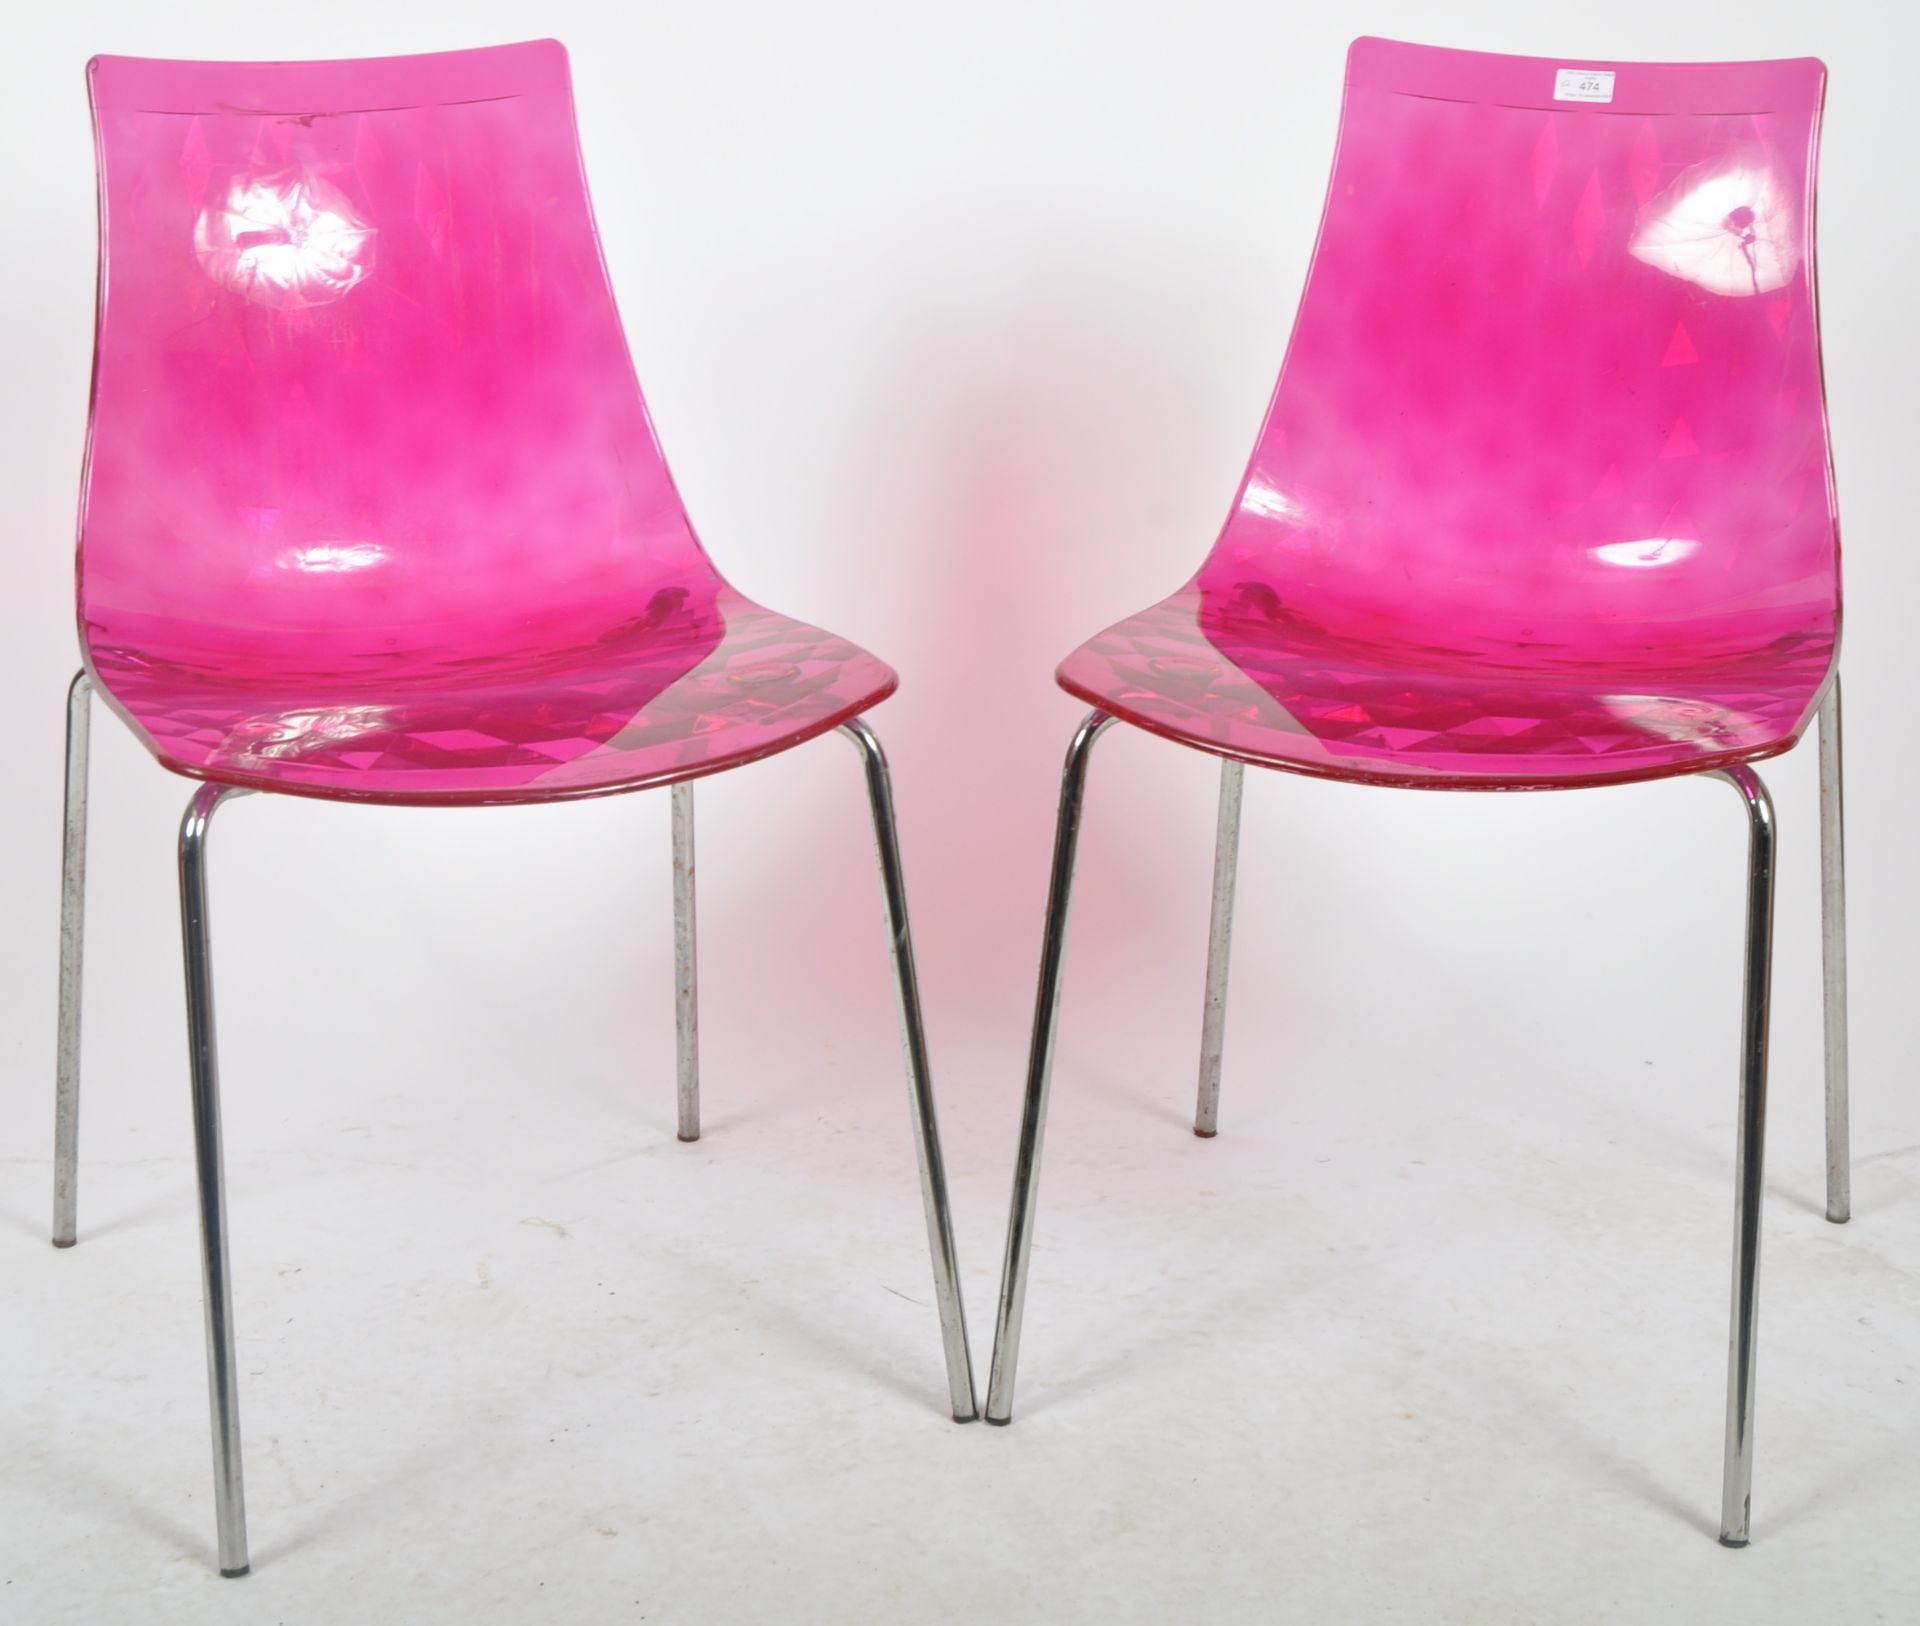 CALLIGARIS - ICE CHAIRS - TWO 80s ITALIAN DESIGNED CHAIRS